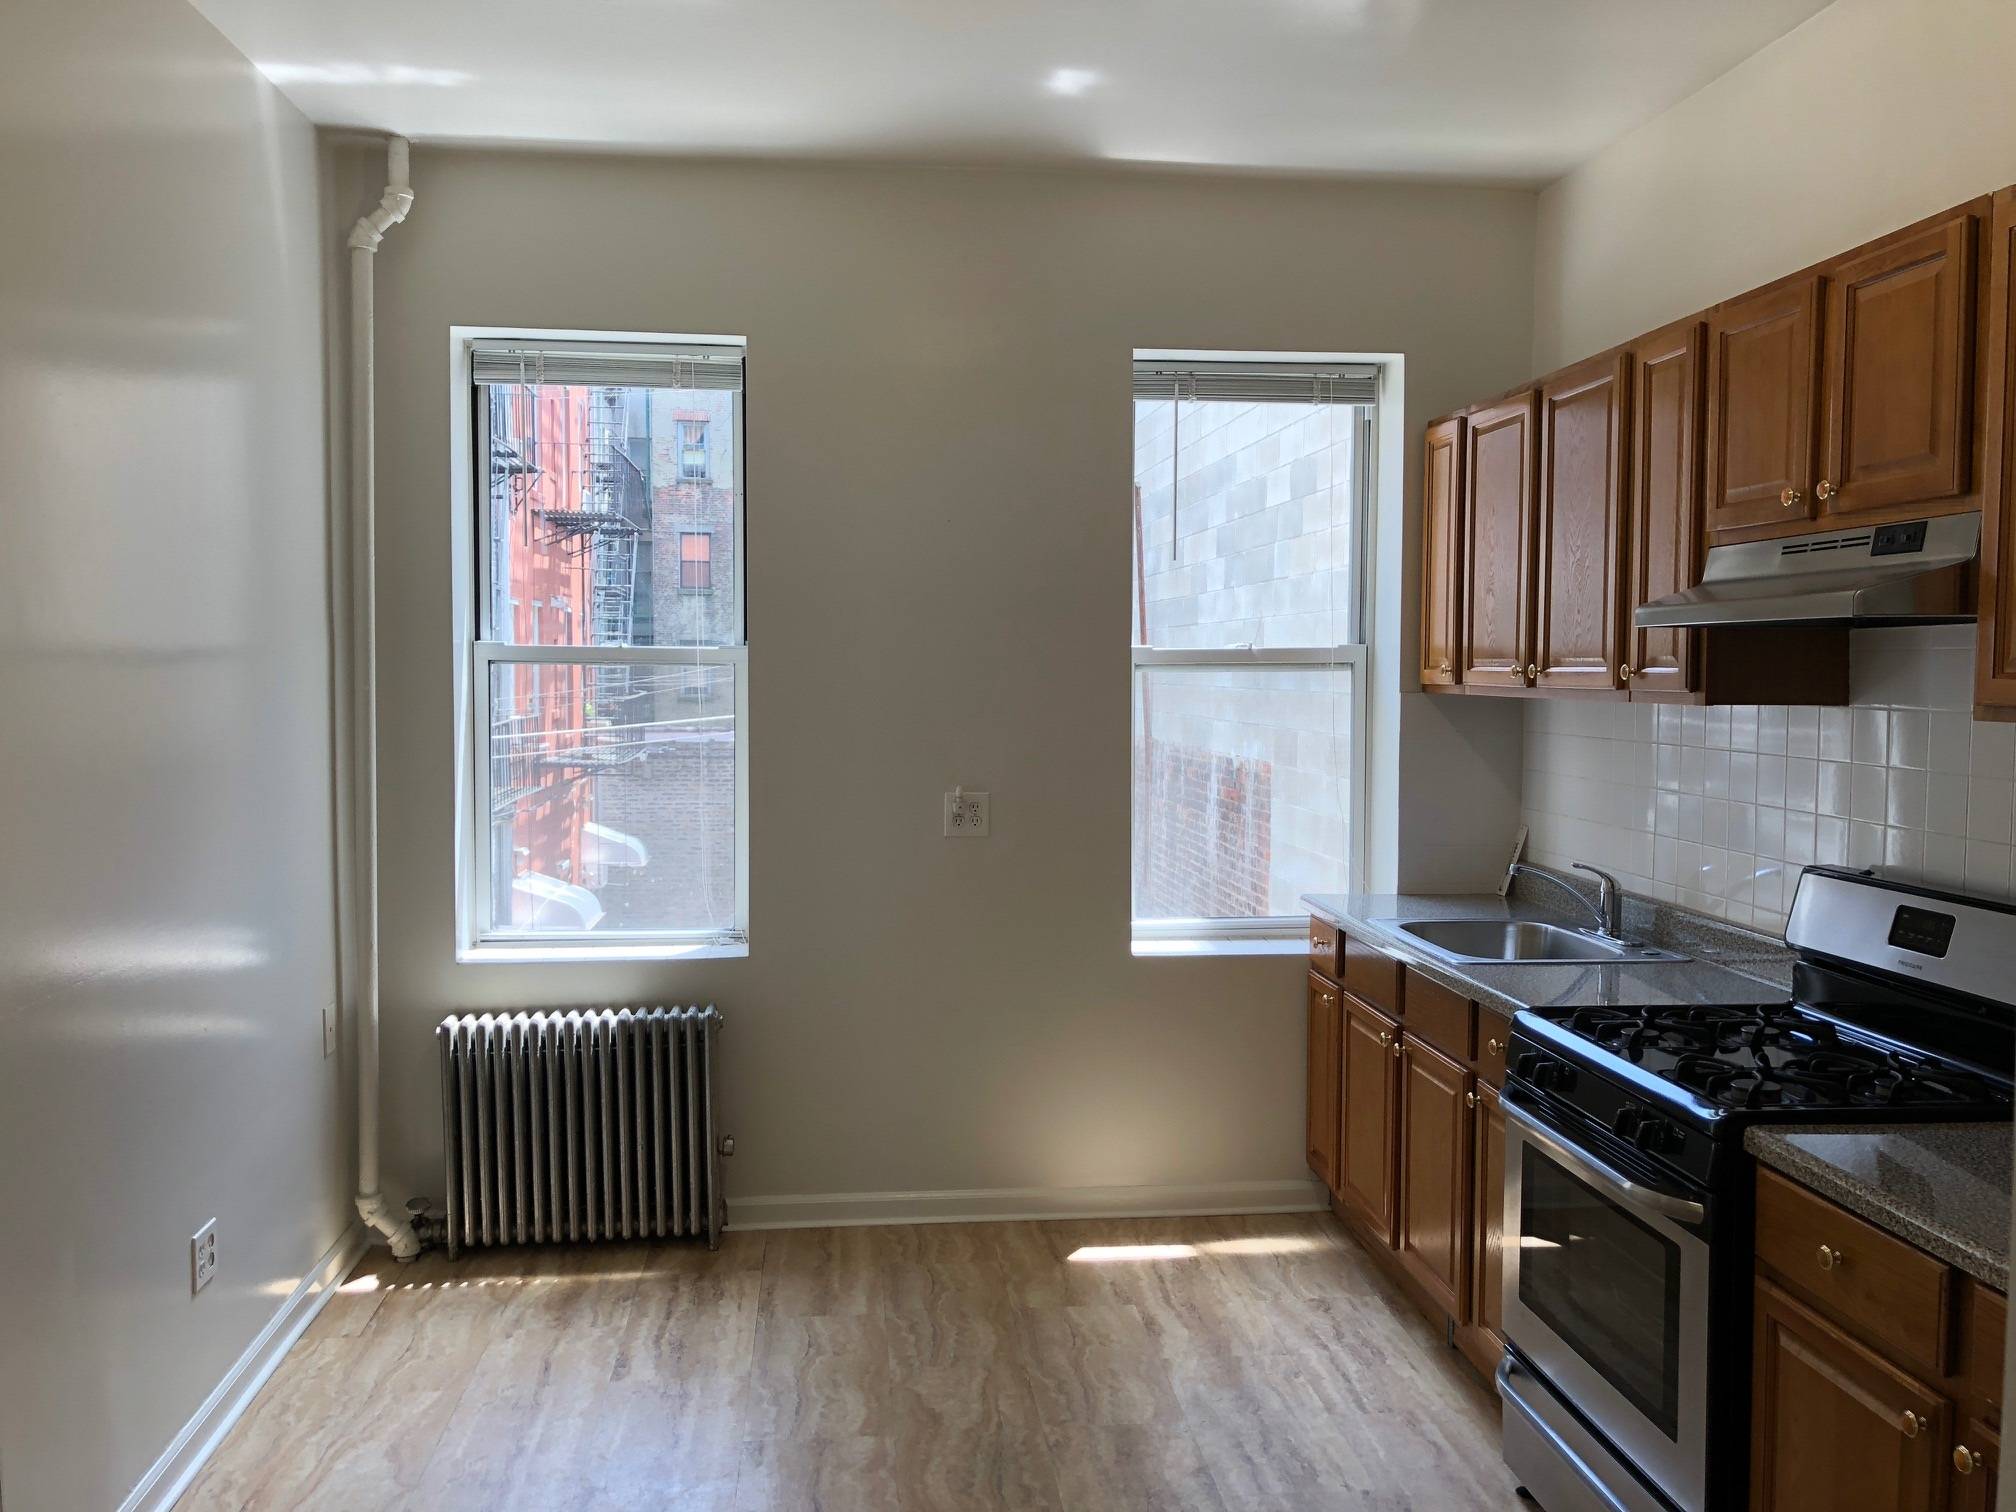 Unique 1 Bedroom With Home Office Just off of Franklin Street - Greenpoint Waterfront!!